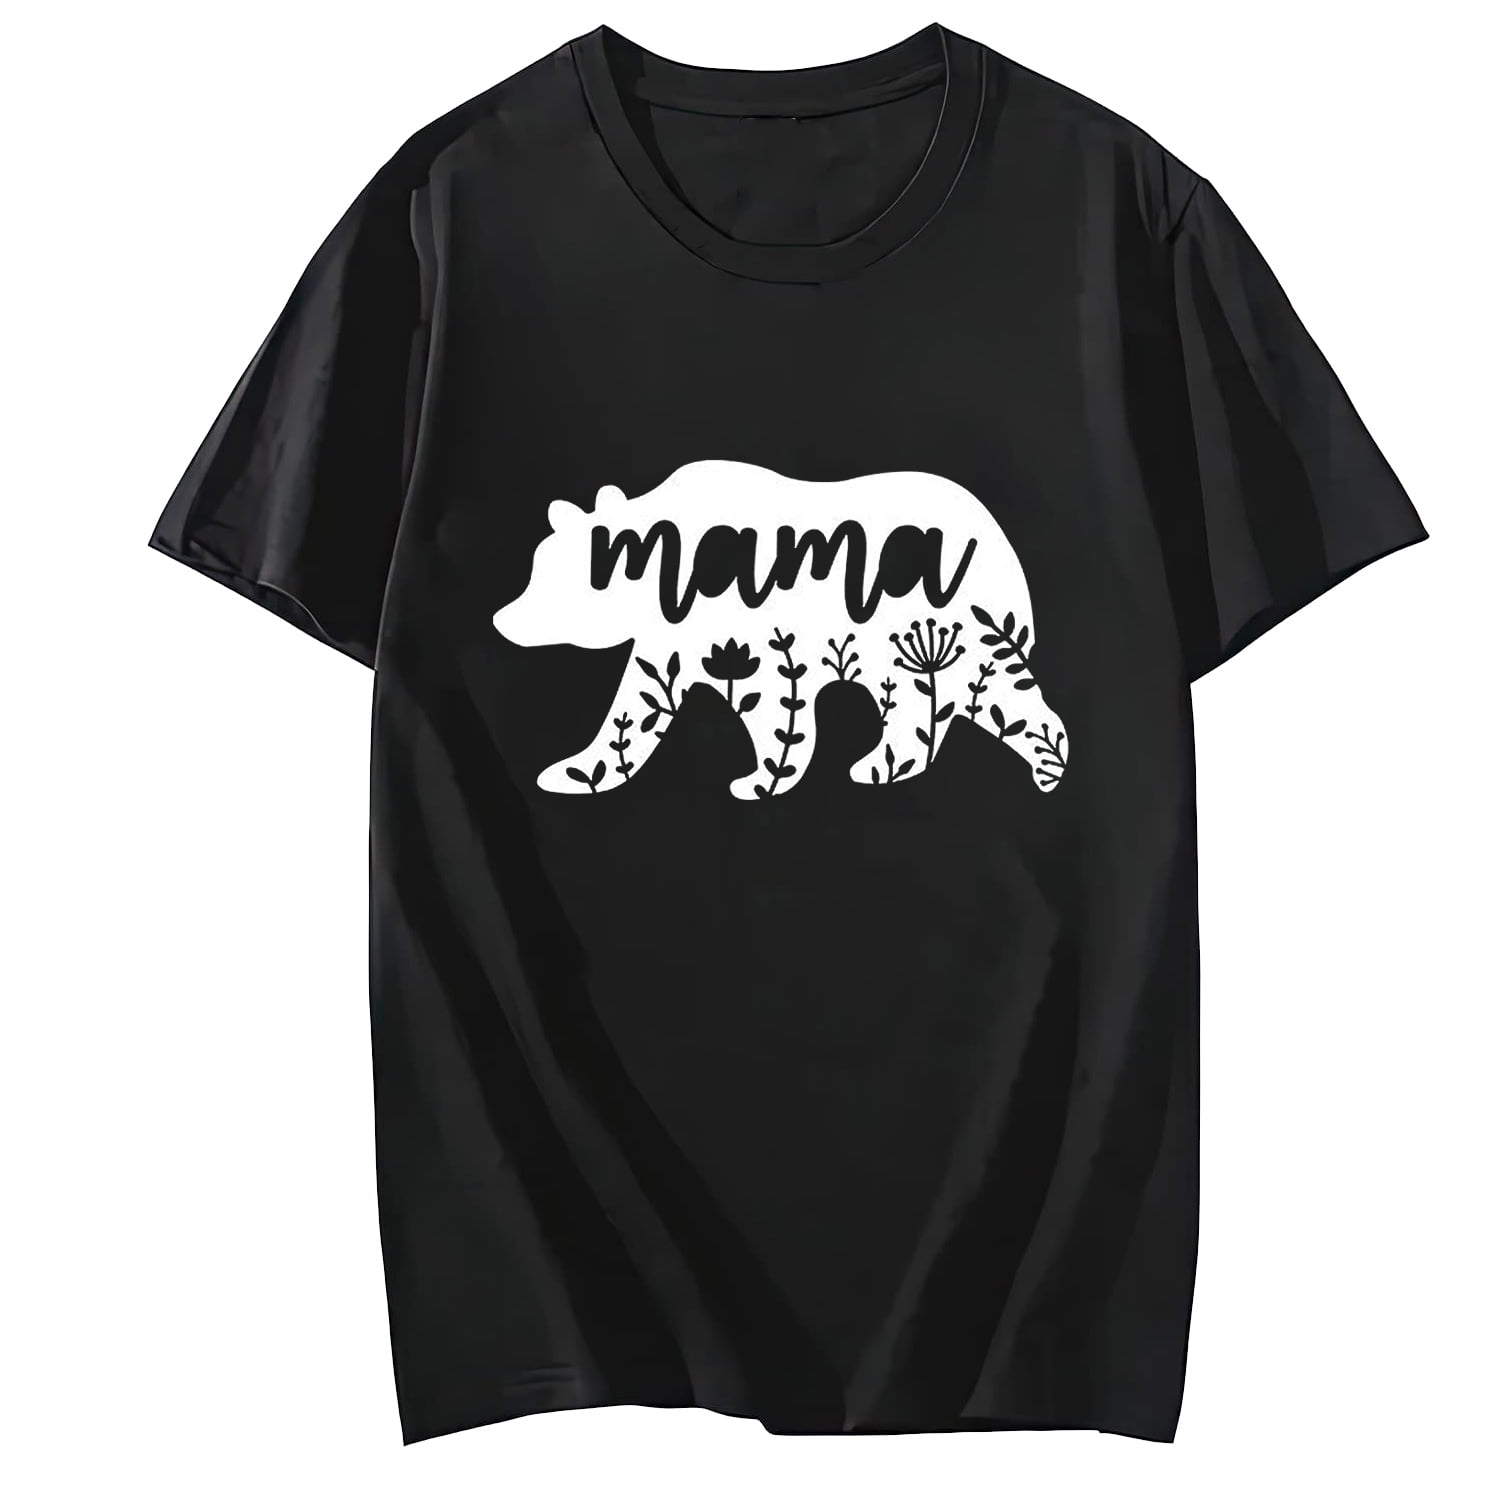 Vivay Women's Top Plus Size T-Shirt with Funny Mama Bear Short Sleeve ...